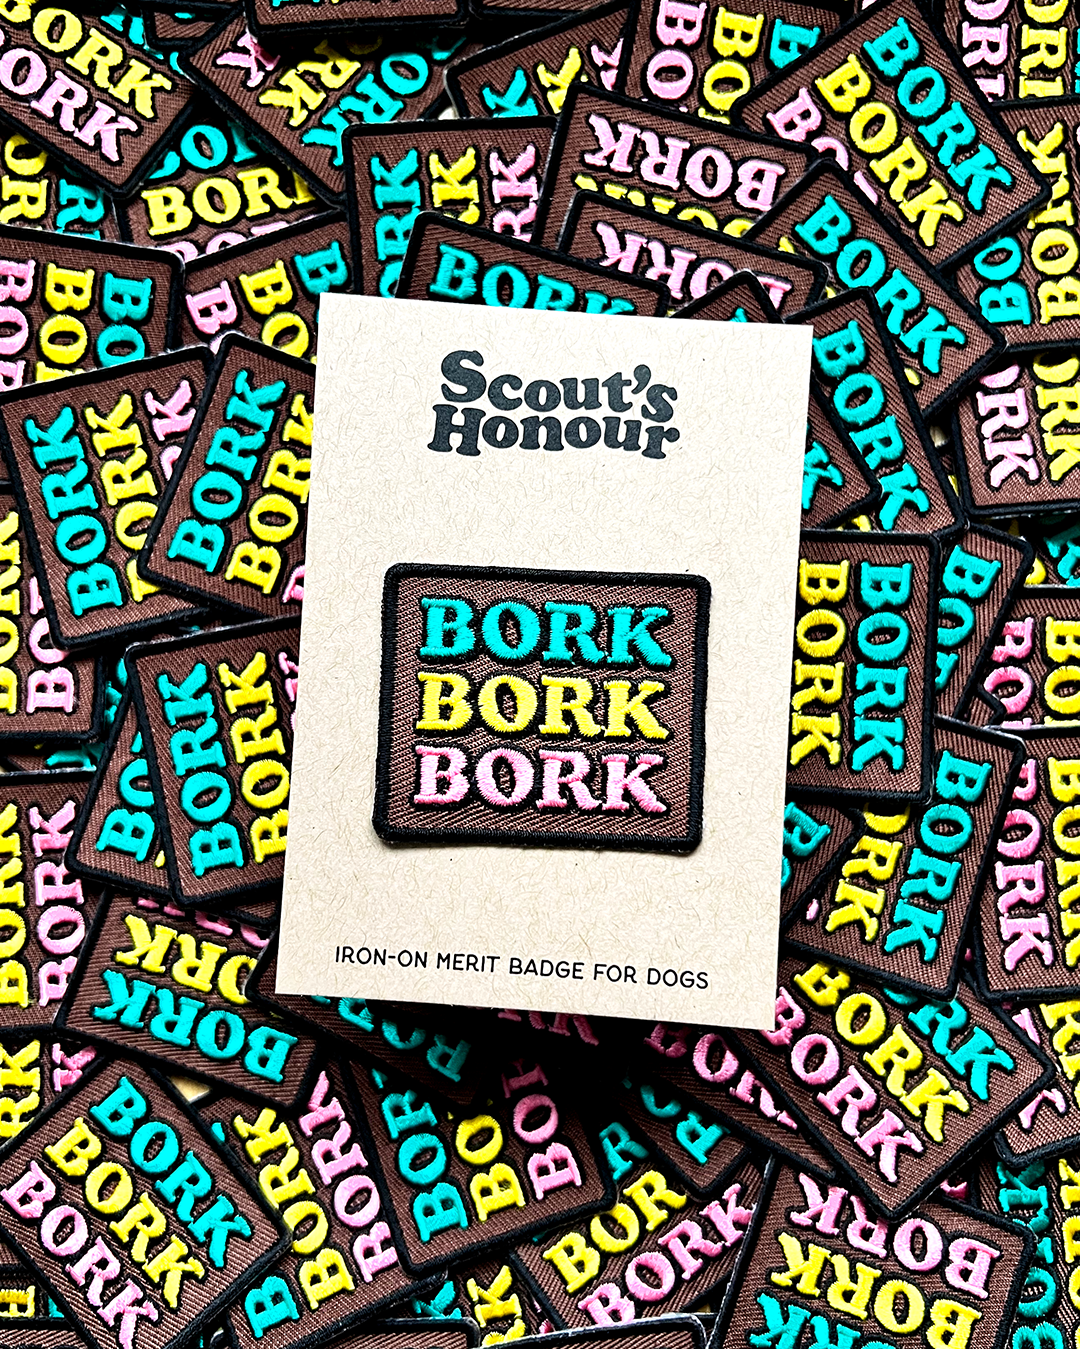 Scout's Honour - Bork iron-on patch for dogs LIMITED EDITION